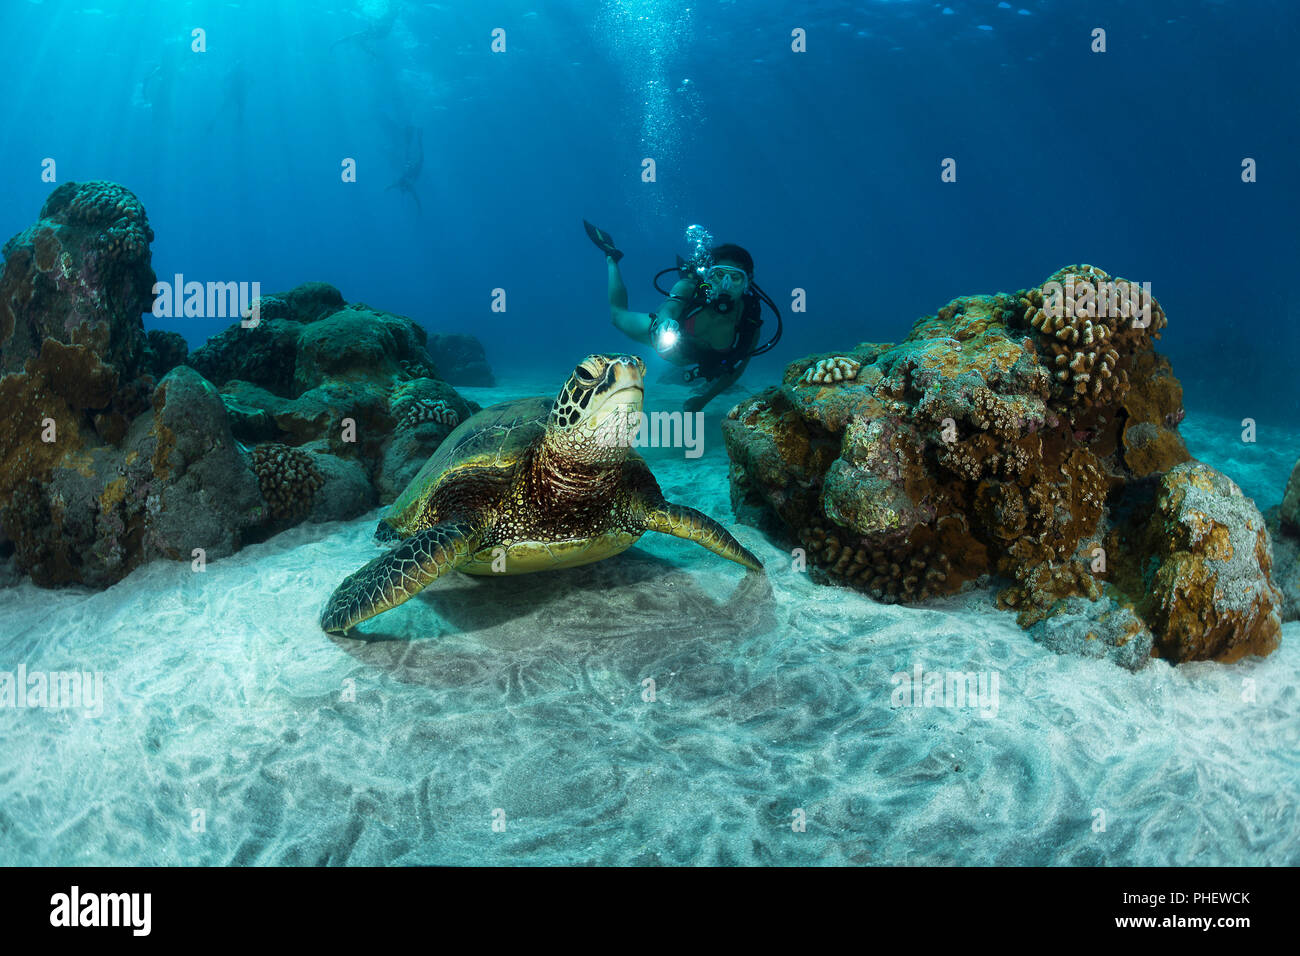 A diver (MR) and green sea turtle, Chelonia mydas, Hawaii. Stock Photo